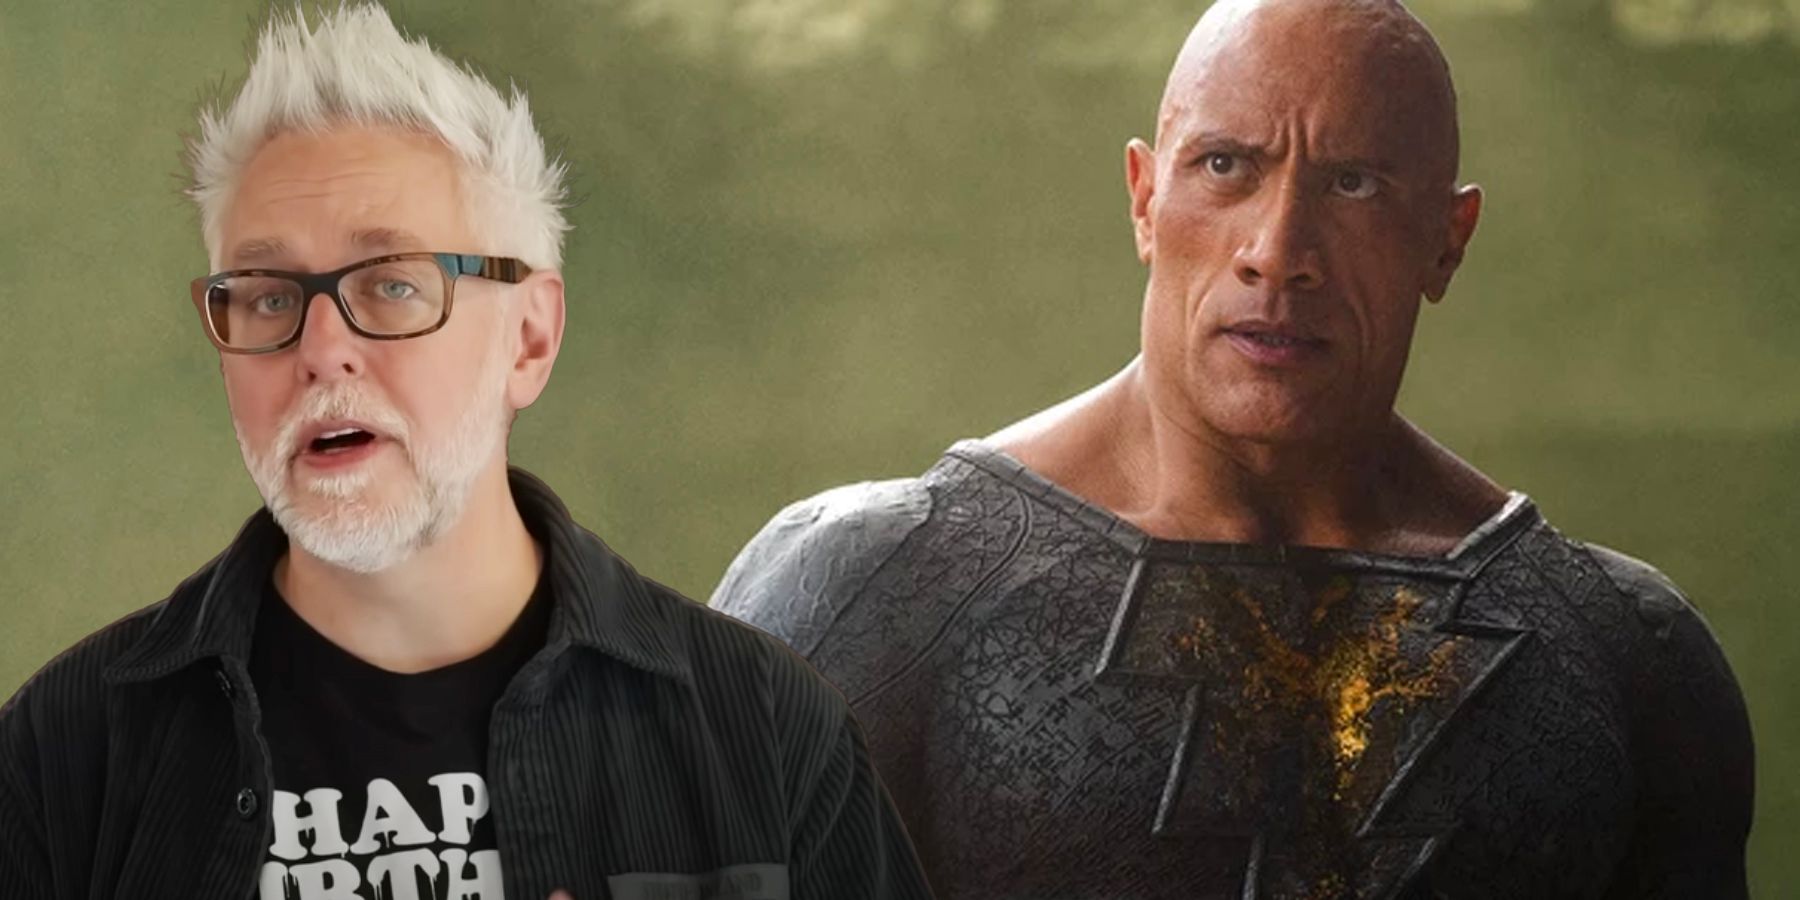 Why Dwayne Johnson's Black Adam Is a Disappointment (Review)